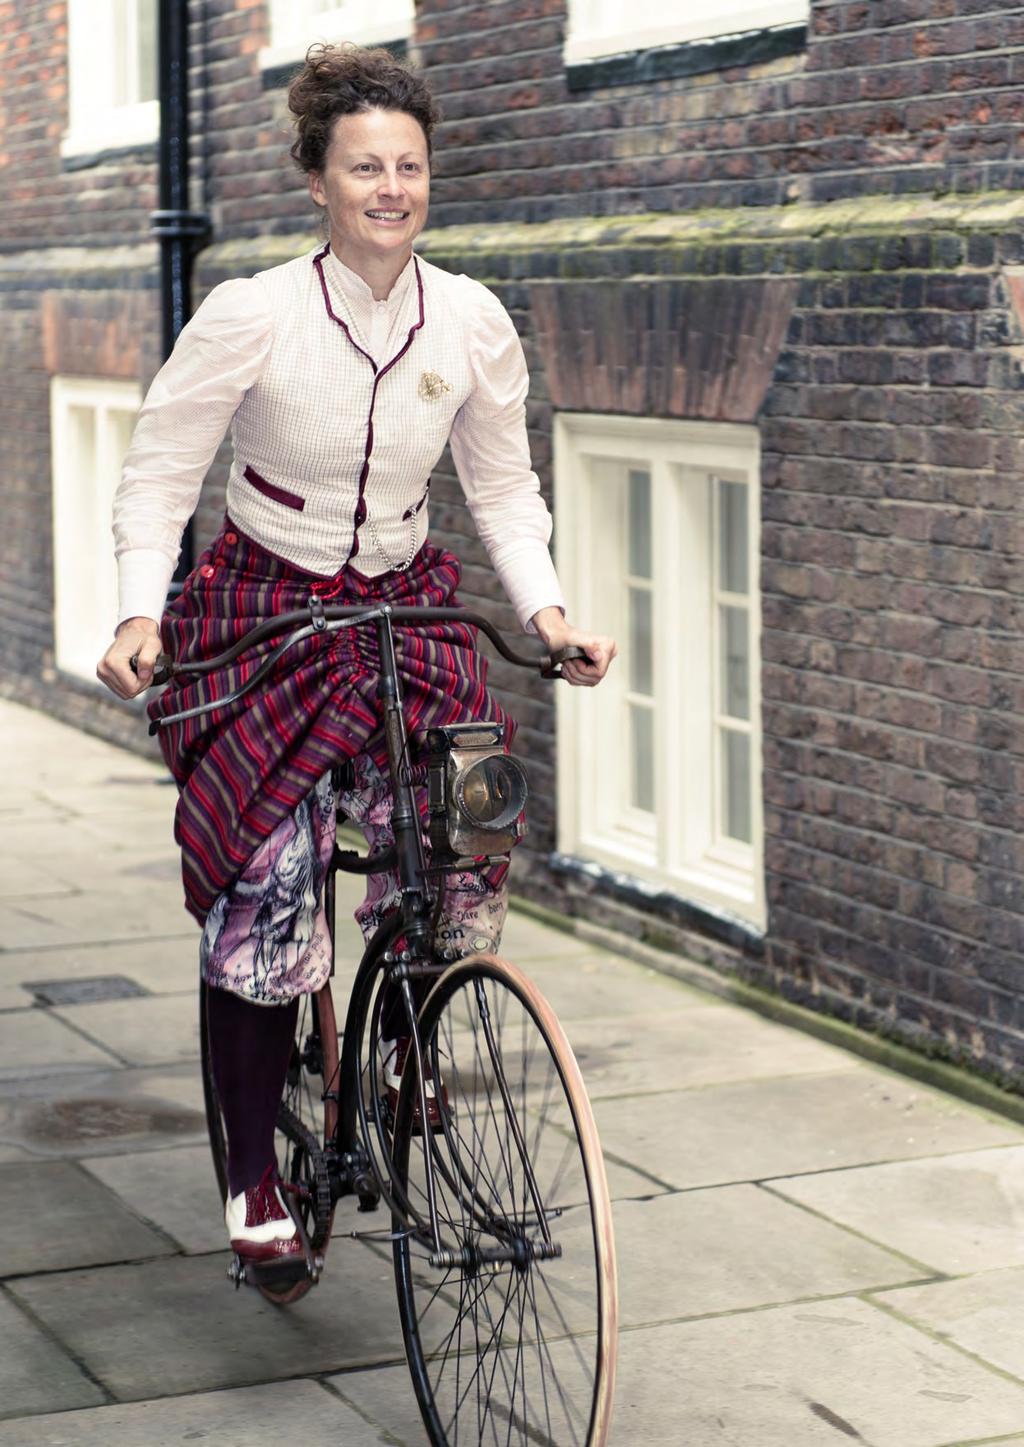 BIKES AND BLOOMERS VICTORIAN WOMEN'S CONVERTIBLE CYCLE WEAR SEWING PATTERNS #1 PULLEY CYCLING